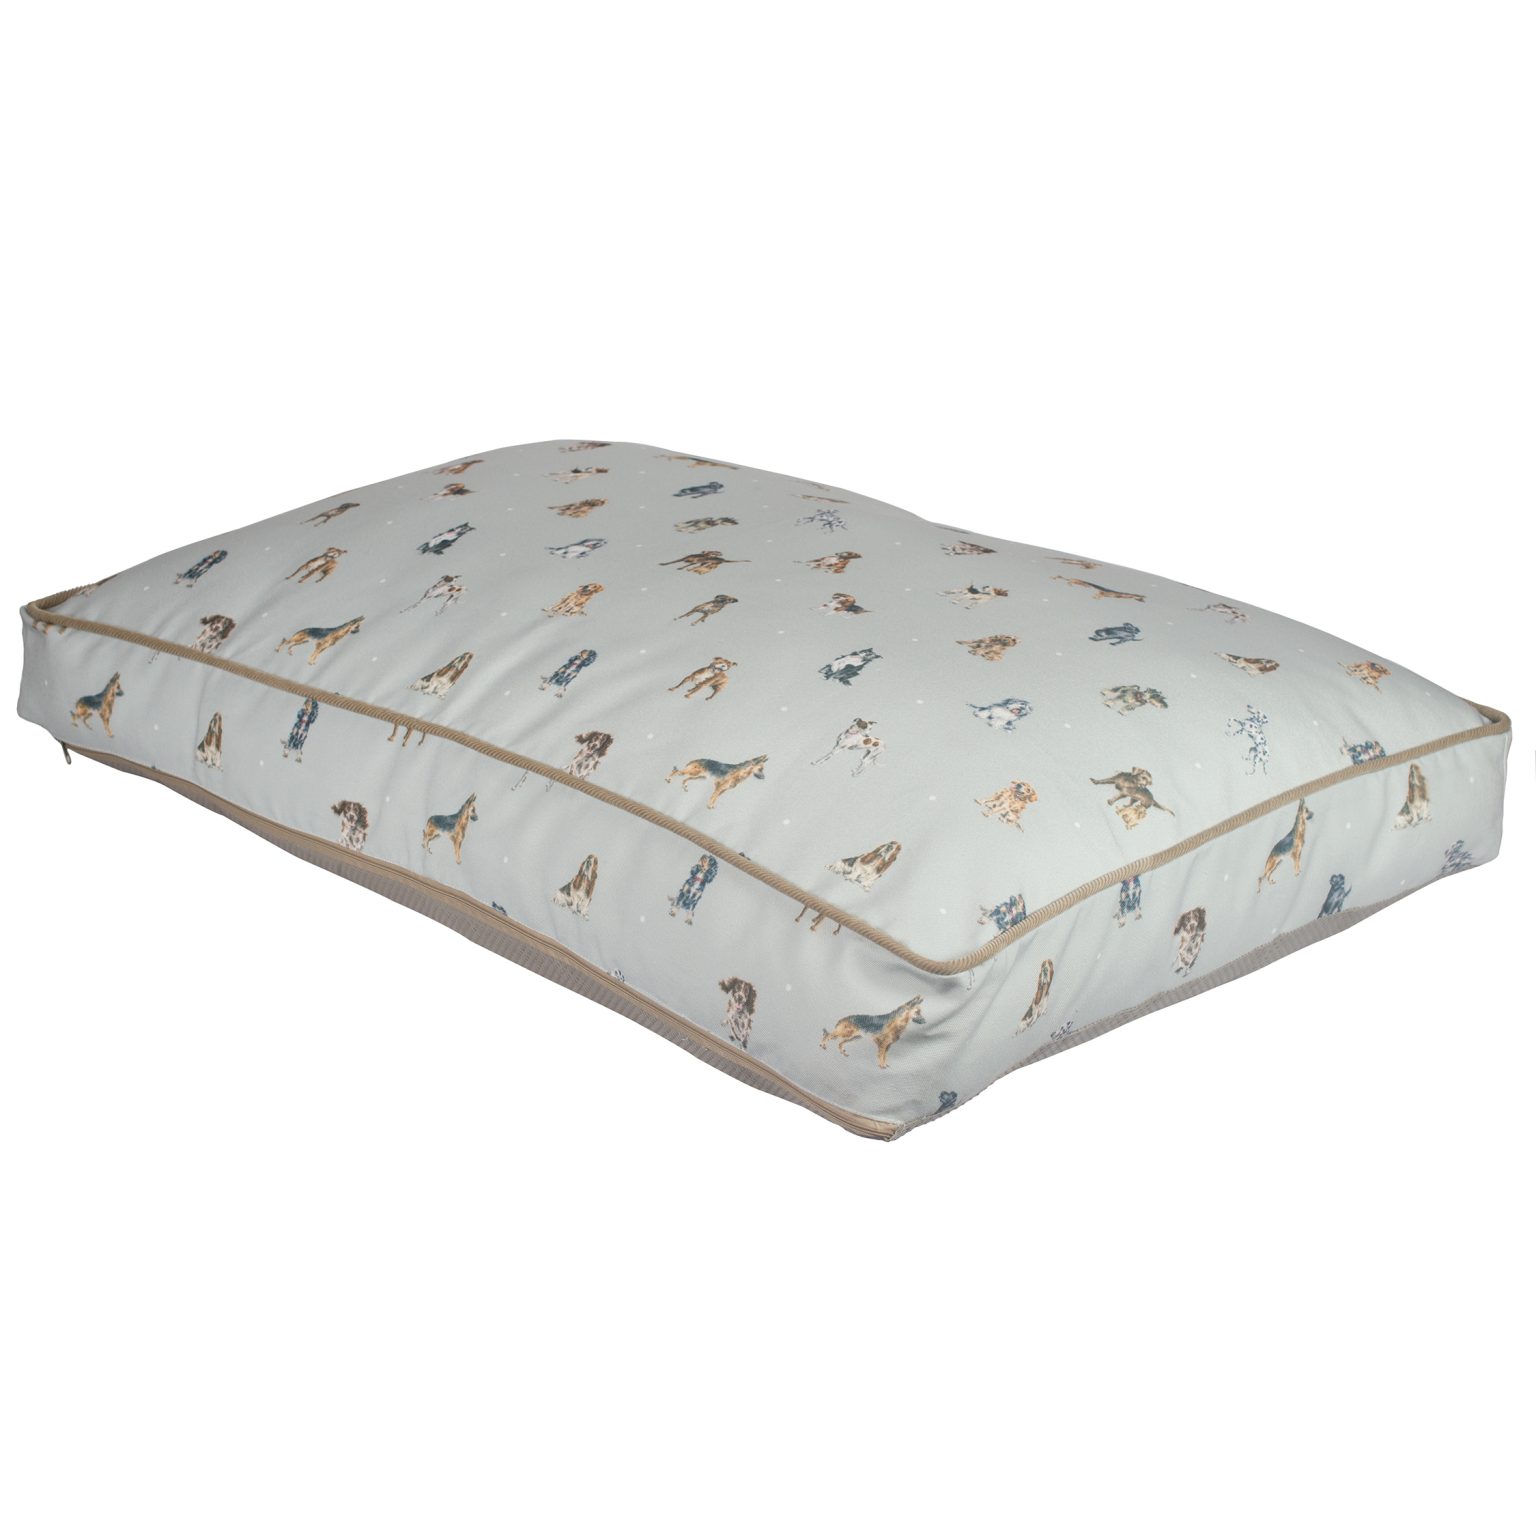 Wrendale Designs Pet Beds & Tinware for Dogs & Cats